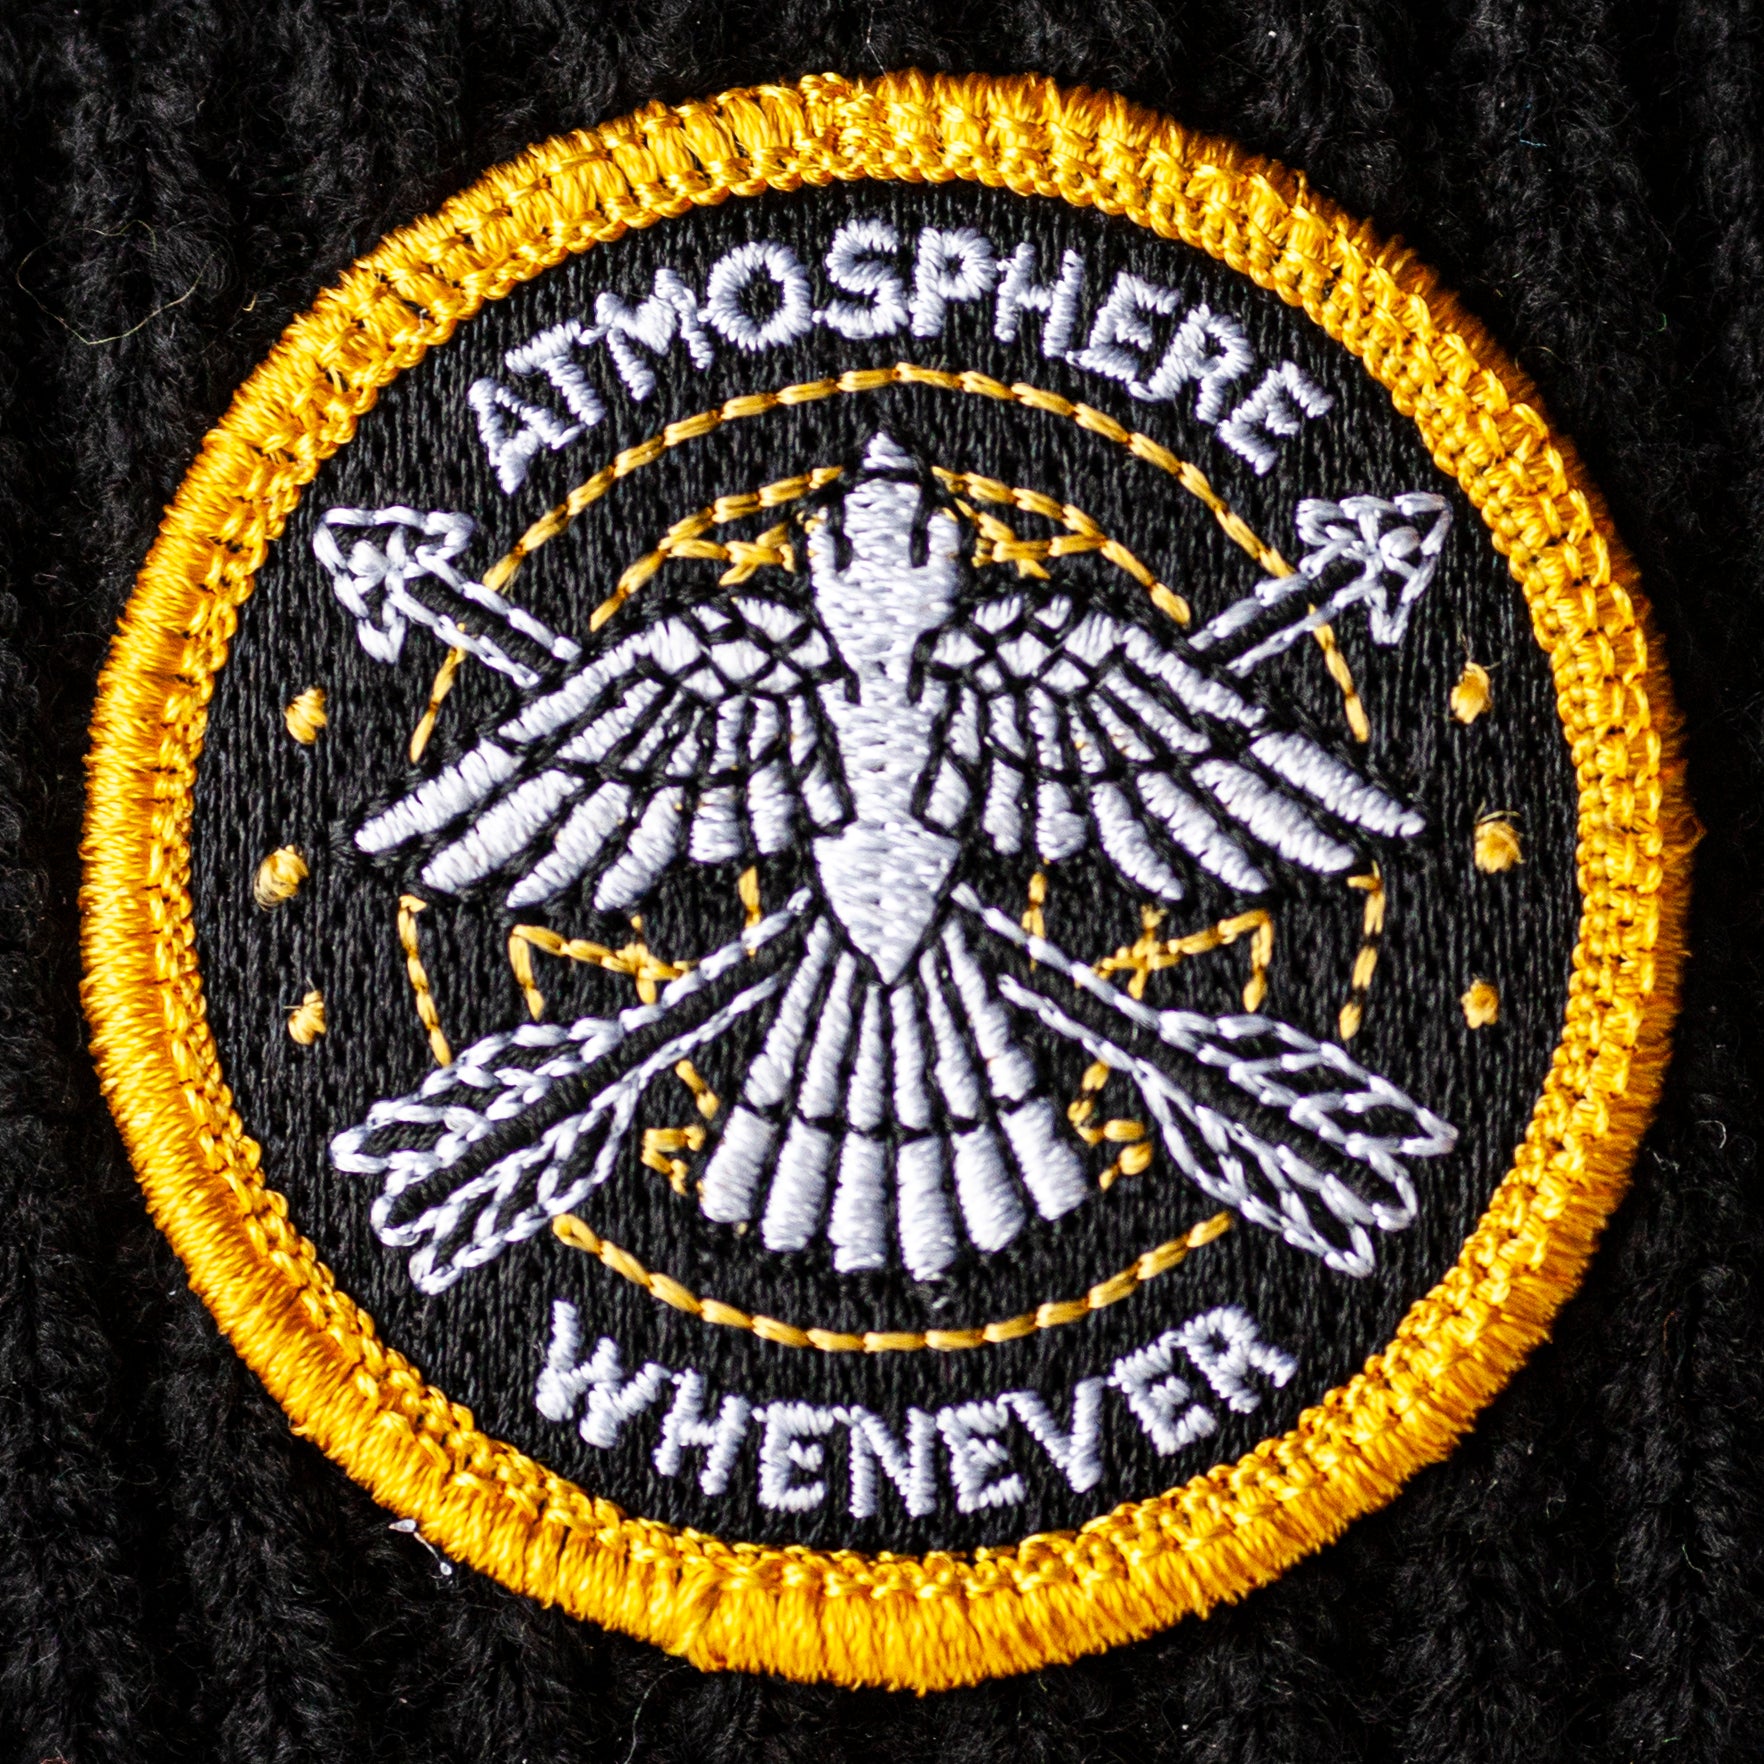 Atmosphere - Whenever Knit Hat